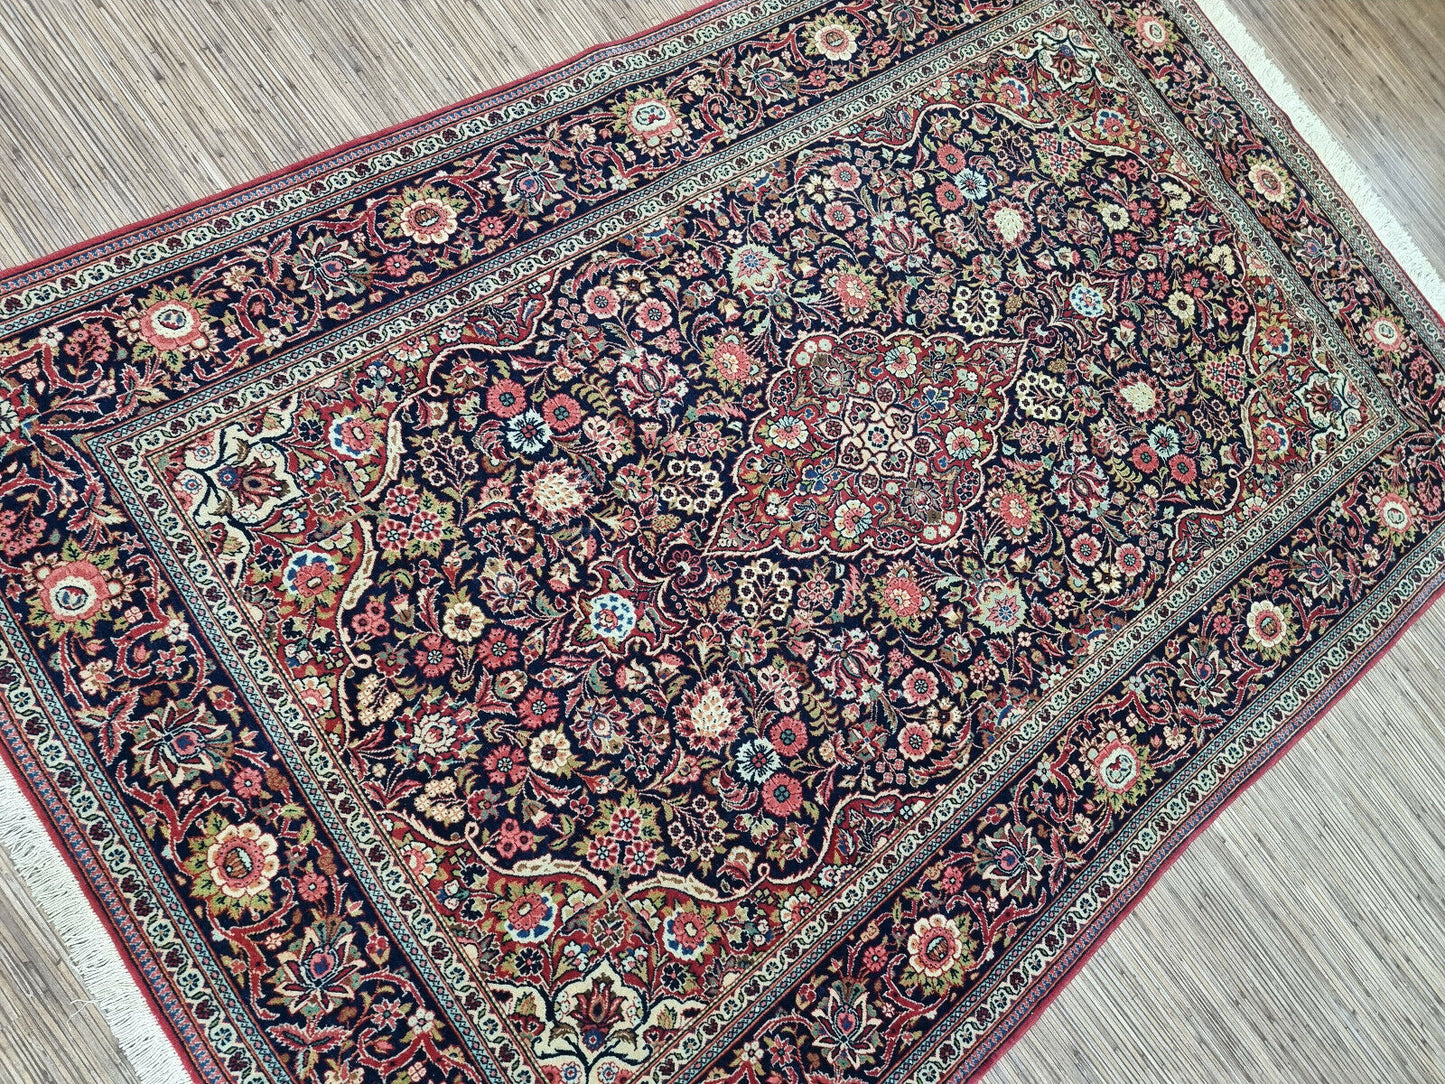 Close-up of charm on Handmade Antique Persian Kashan Rug - Detailed view highlighting the rug's charm and visual allure.